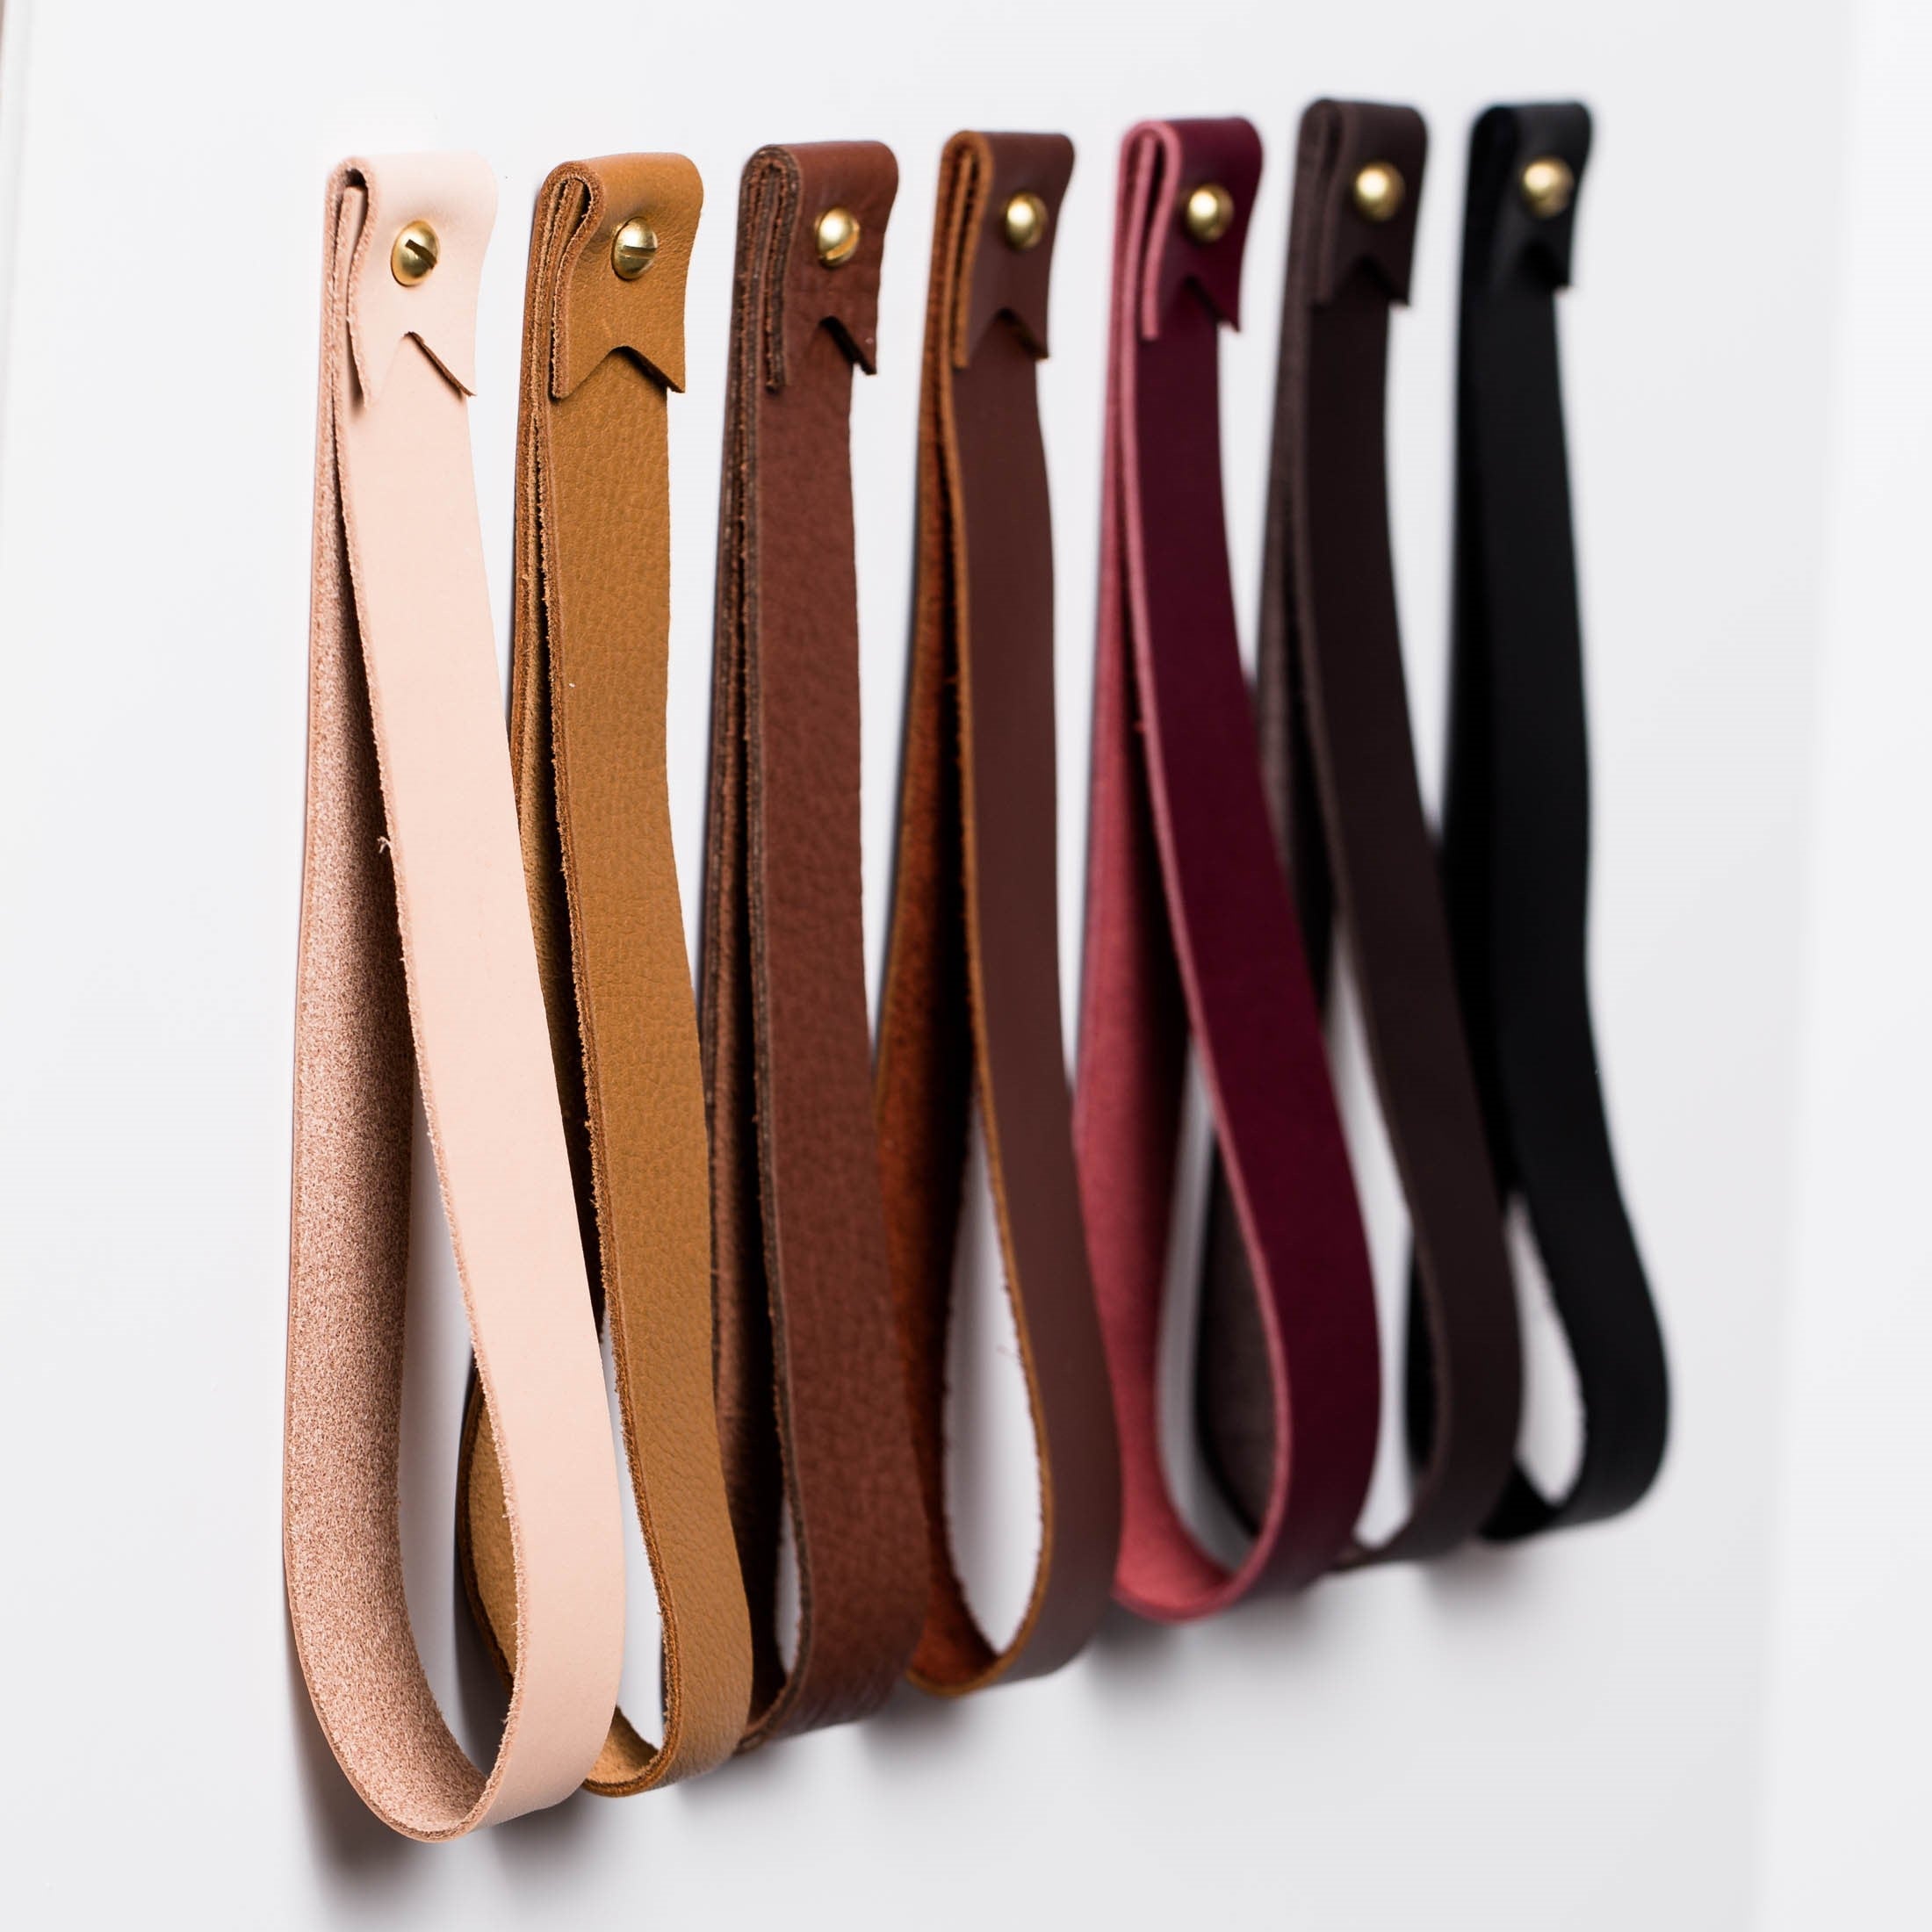 Large Leather Wall Strap | Modern Home Decor Accents & Storage